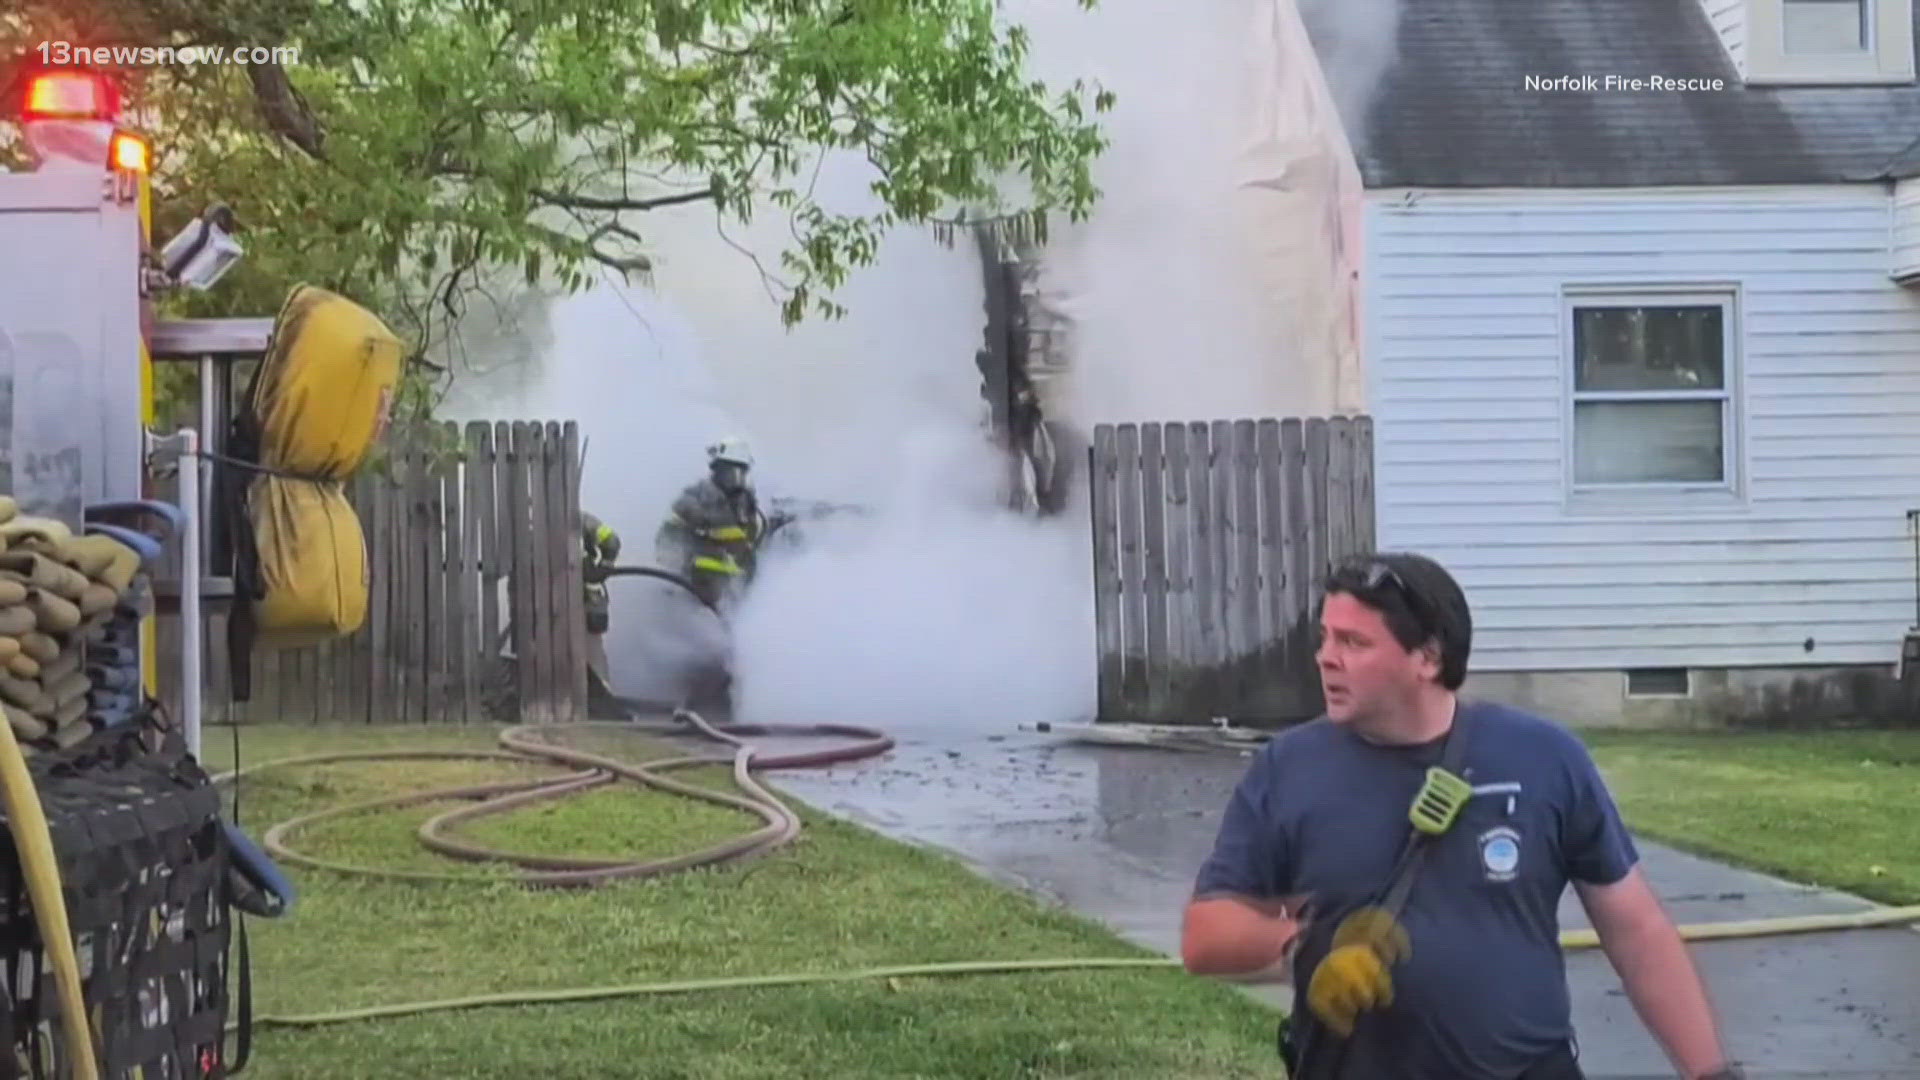 Four people have been displaced after an electric car fire spread to their home Tuesday morning.